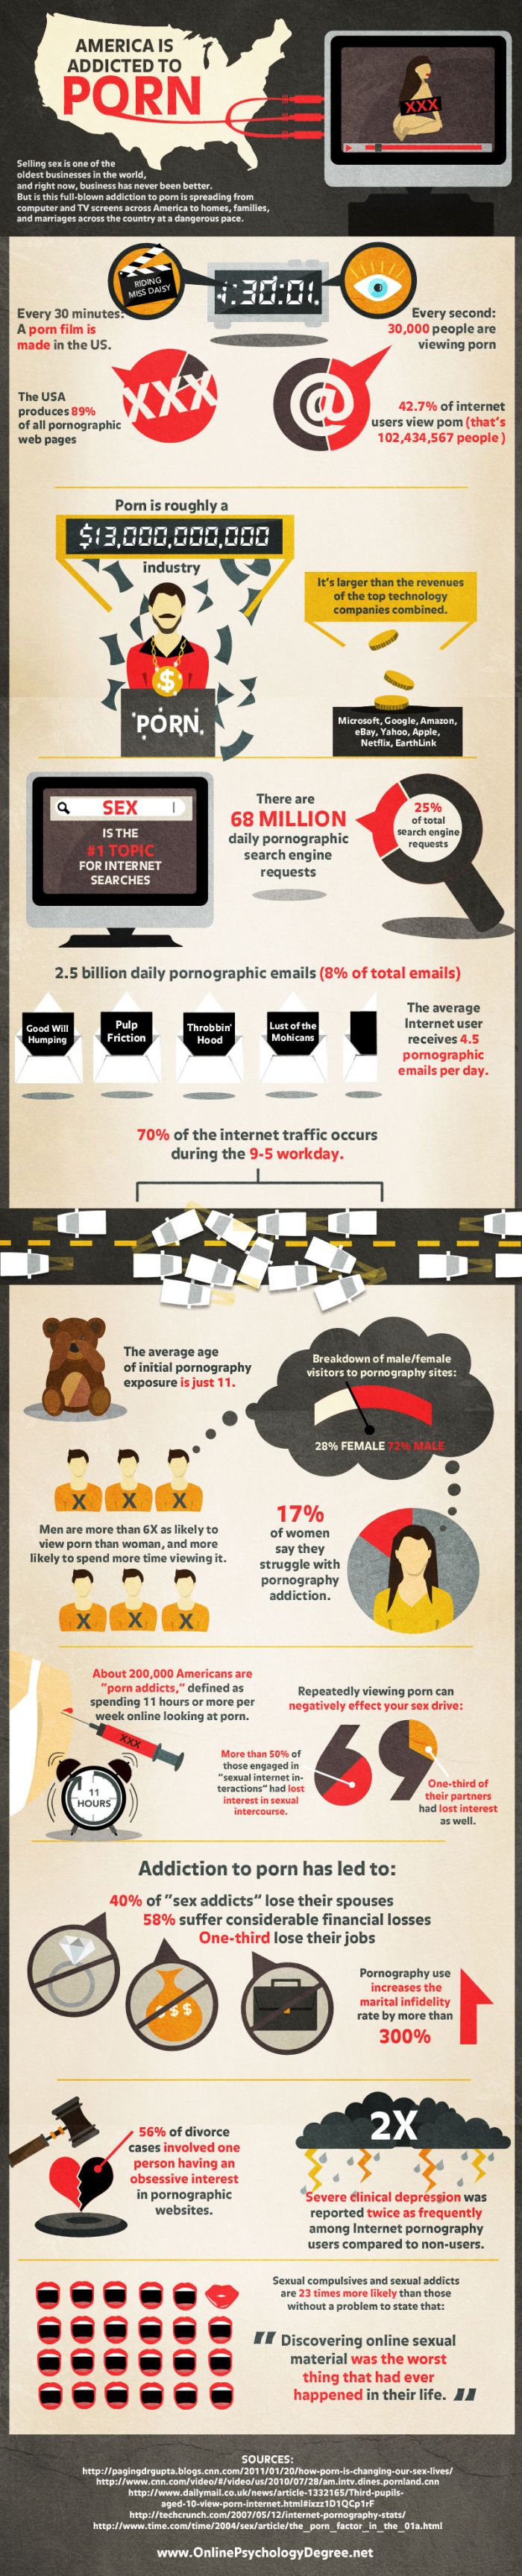 America is Addicted to Porn (infographic)